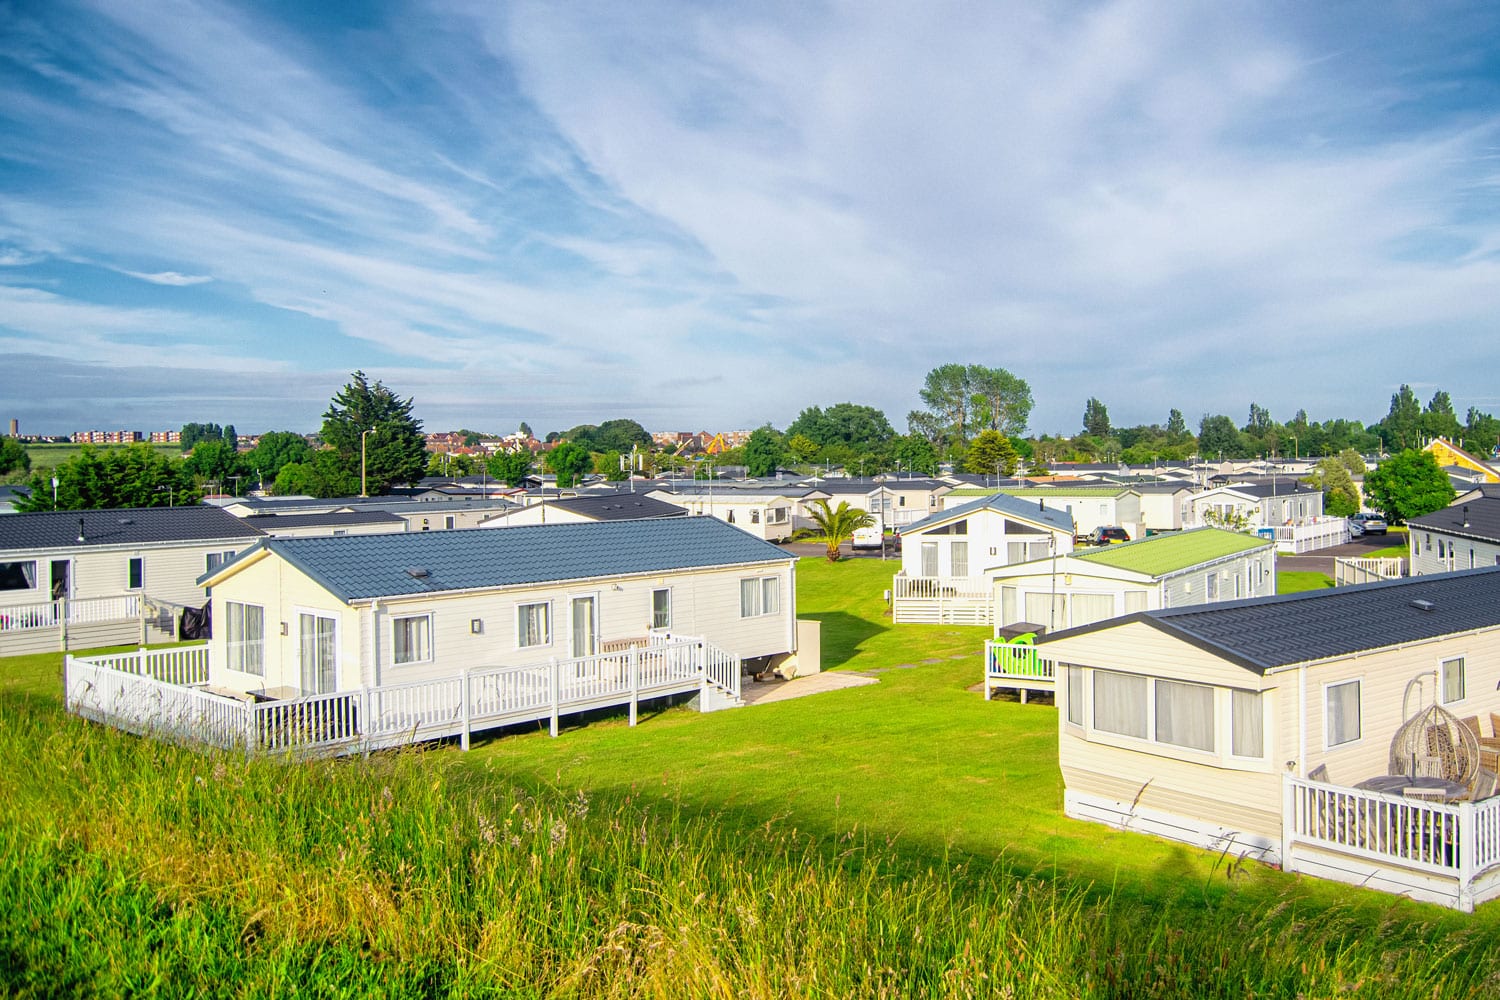 Gorgeous mobile homes at a flat field